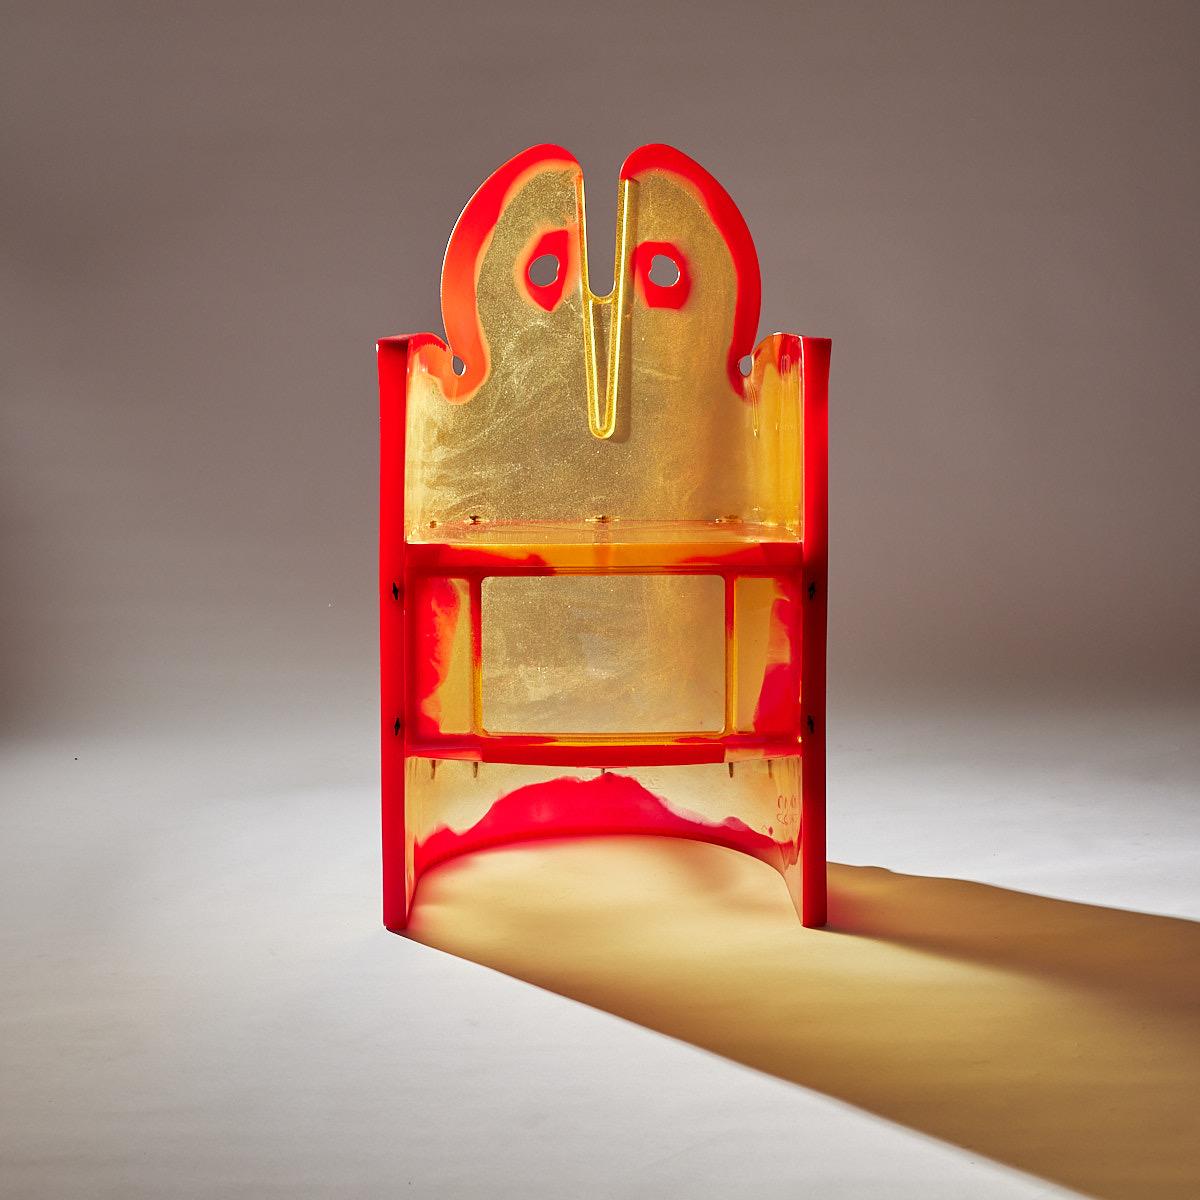 Gaetano Pesce (Born 1939) 
'Nobody's Perfect' armchair and table, 2003 and 2005 
ZeroDisegno editor

Unique armchair in polyurethane resin and molded plastic tinted orange and red in the mass 
Signed and dated 22/04/05 
Marking of the editor